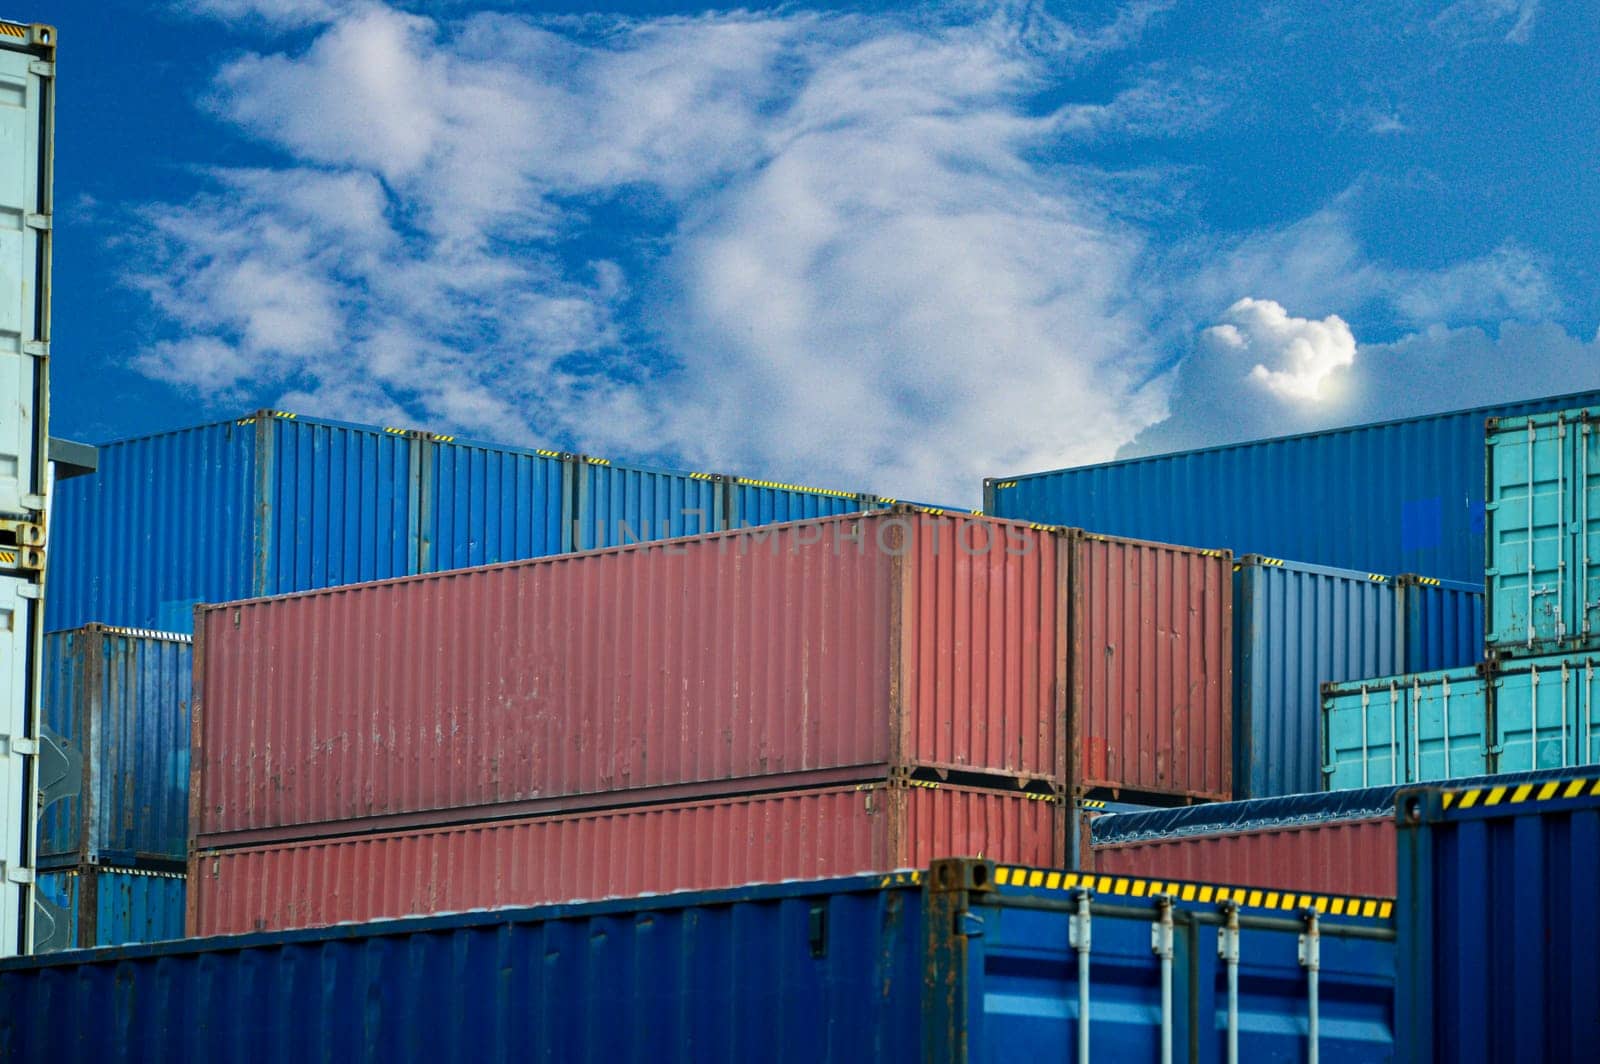 Image of large shipping containers stacked on top of each other. by boonruen